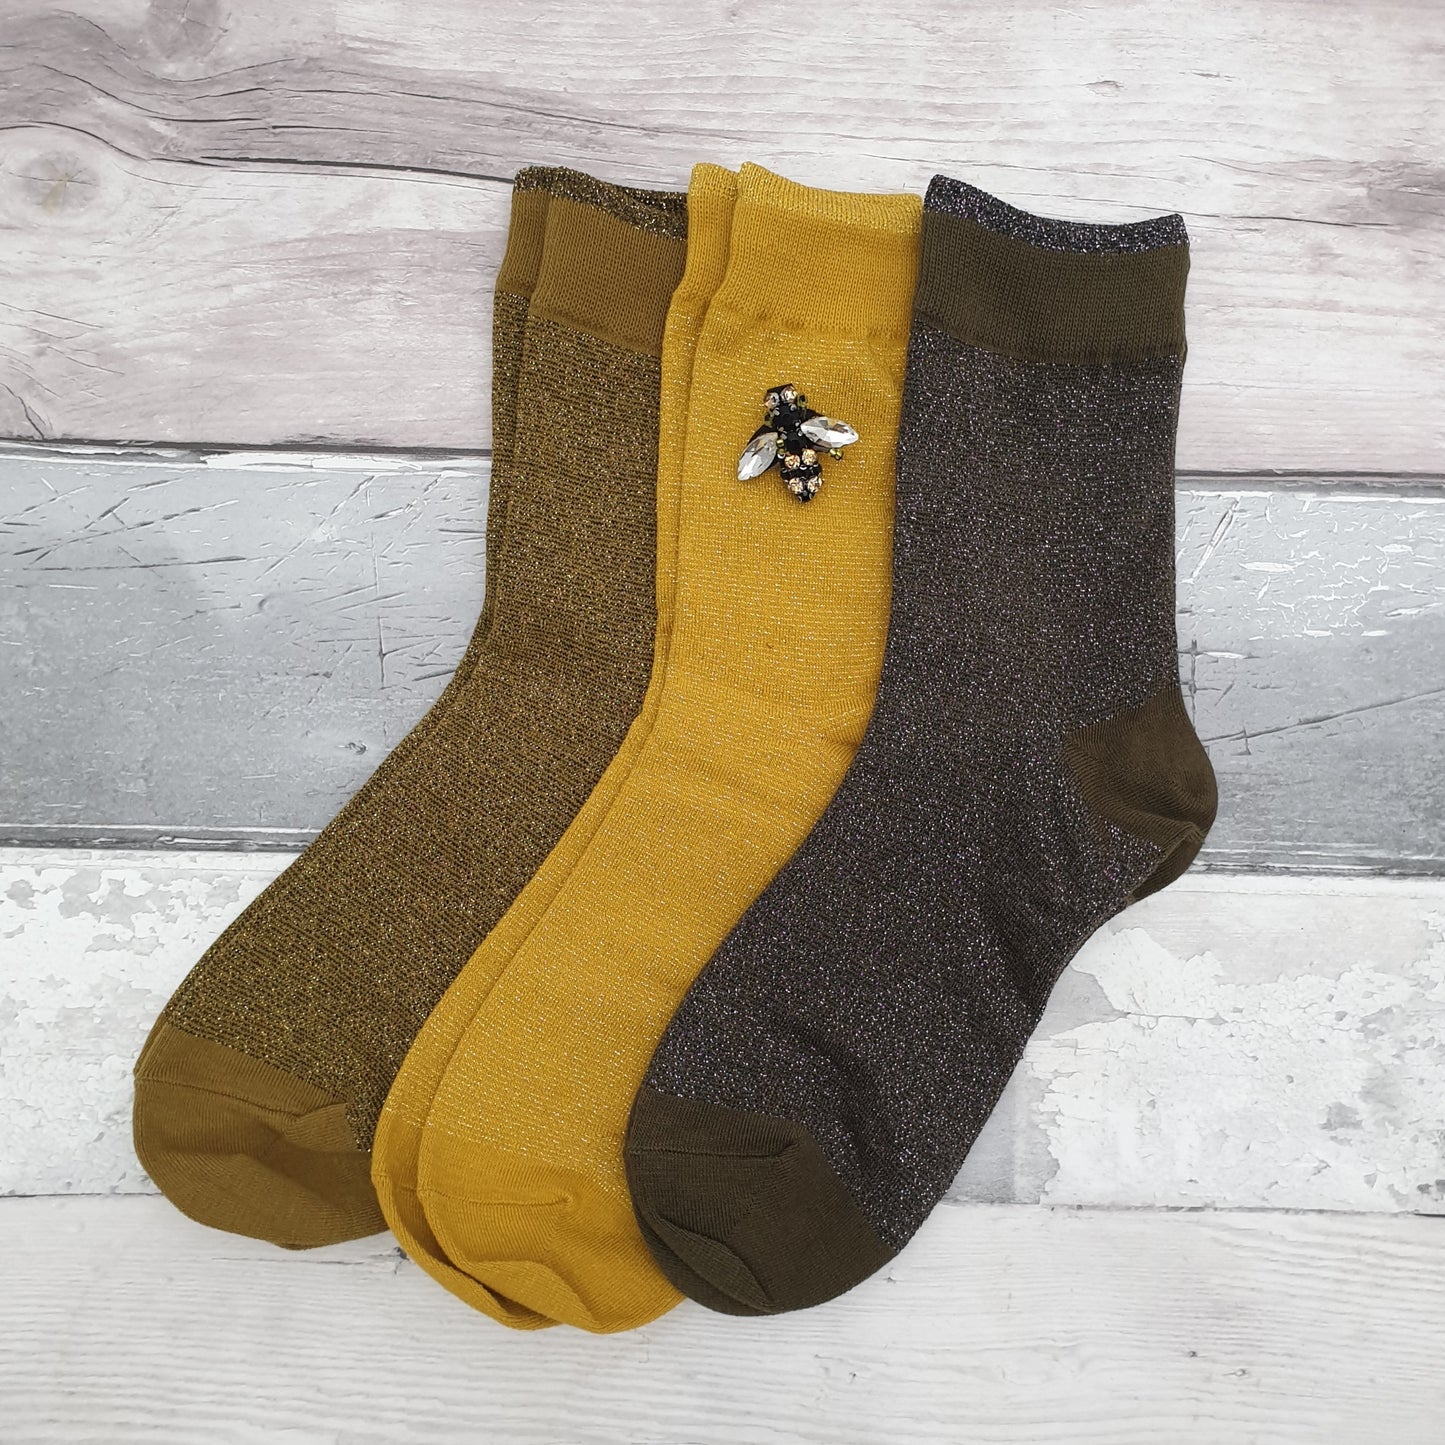 3 Pairs of Sparkly socks in Yellow, Olive and Pewter with a Glass Bee Brooch.